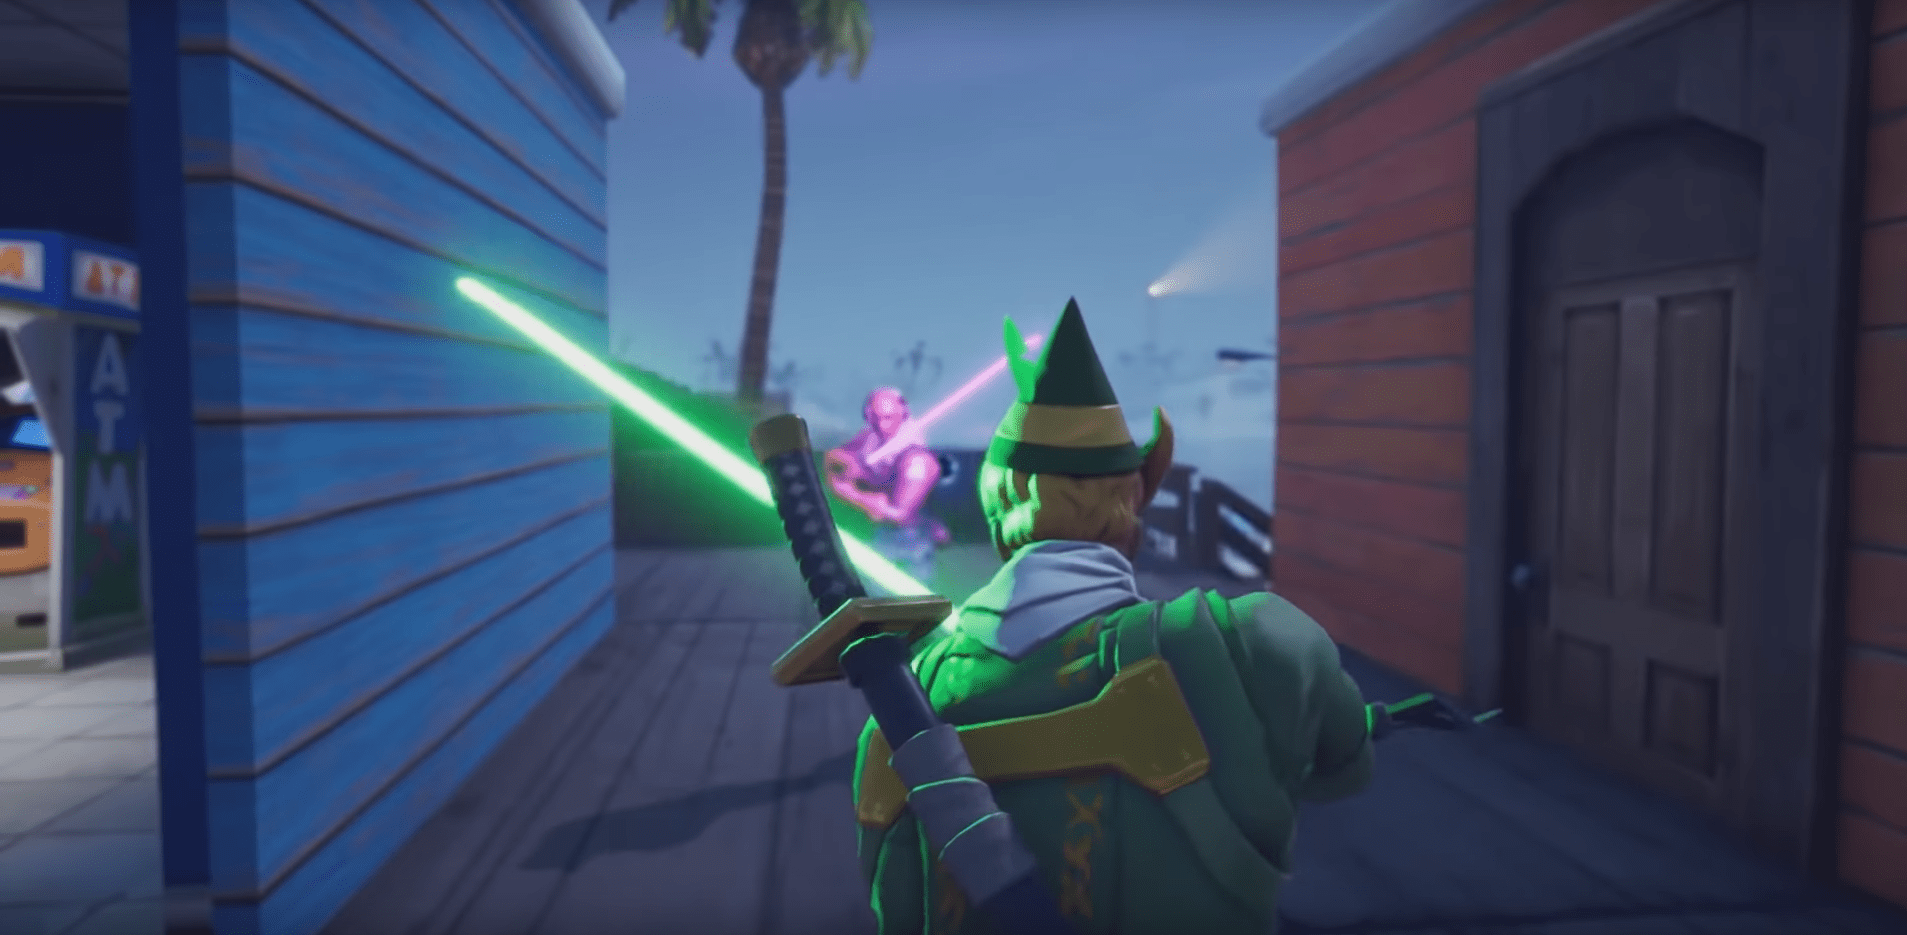 Lightsabers Will Be Leaving Fortnite Soon, Which Some Players Are Ready For